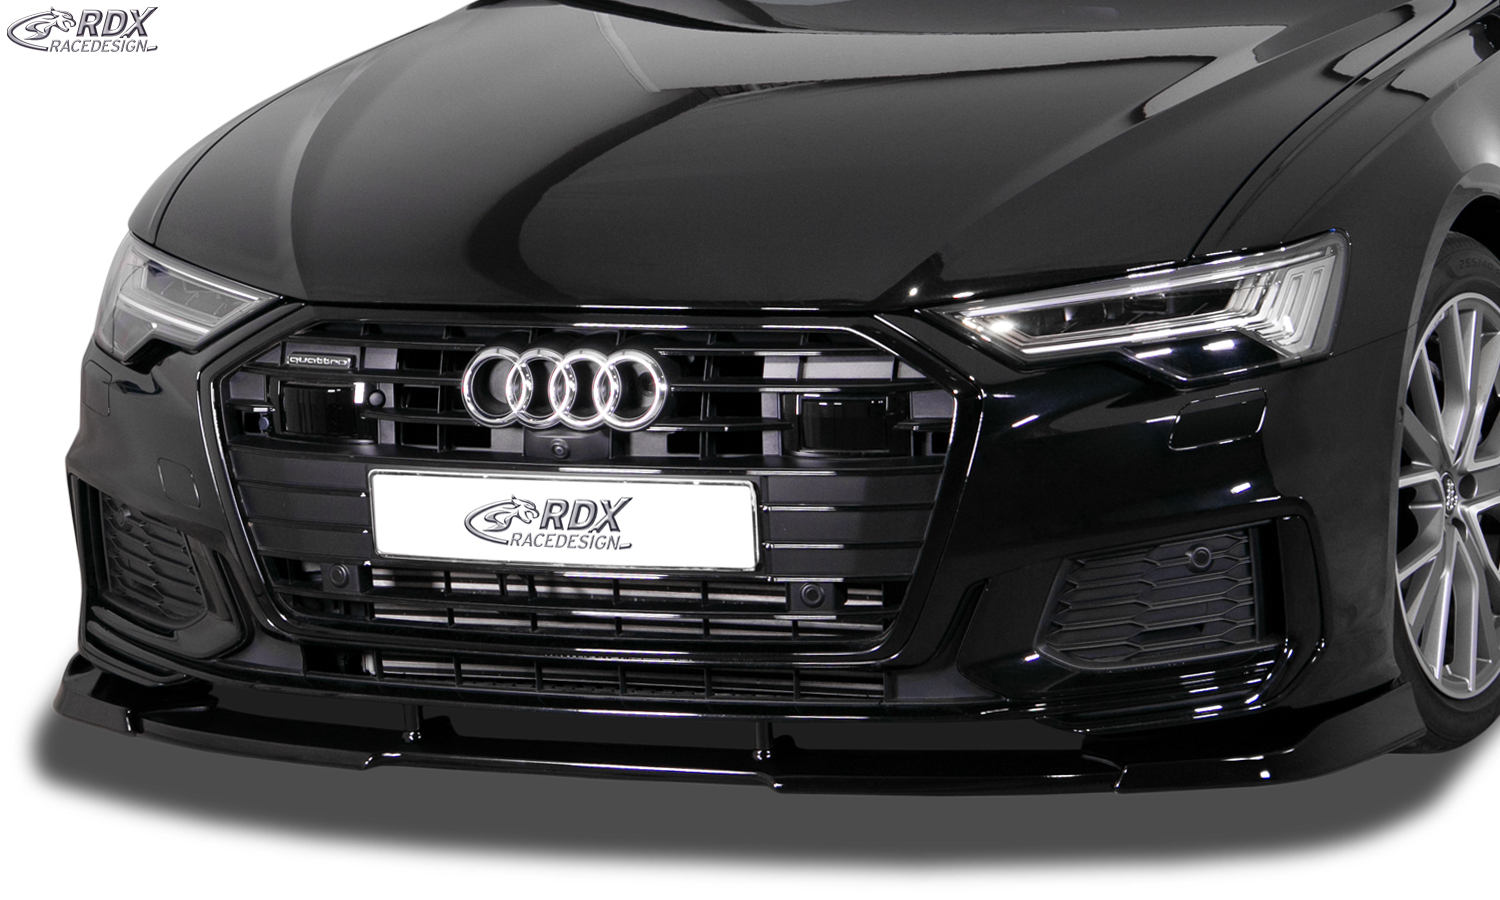 RDX Front Spoiler VARIO-X for AUDI A6 4K C8 2F S-Line / S6 (fit for S-Line- and S6-Frontbumper) Front Lip Splitter